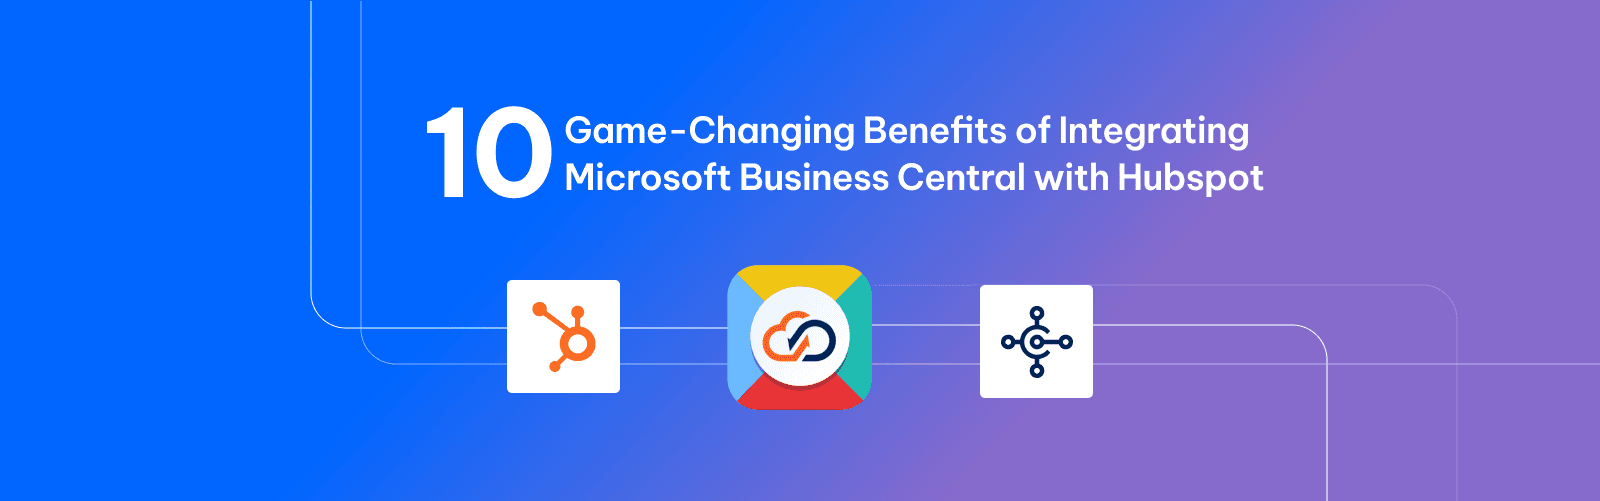 10 Game-Changing Benefits of Integrating Microsoft Business Central with Hubspot